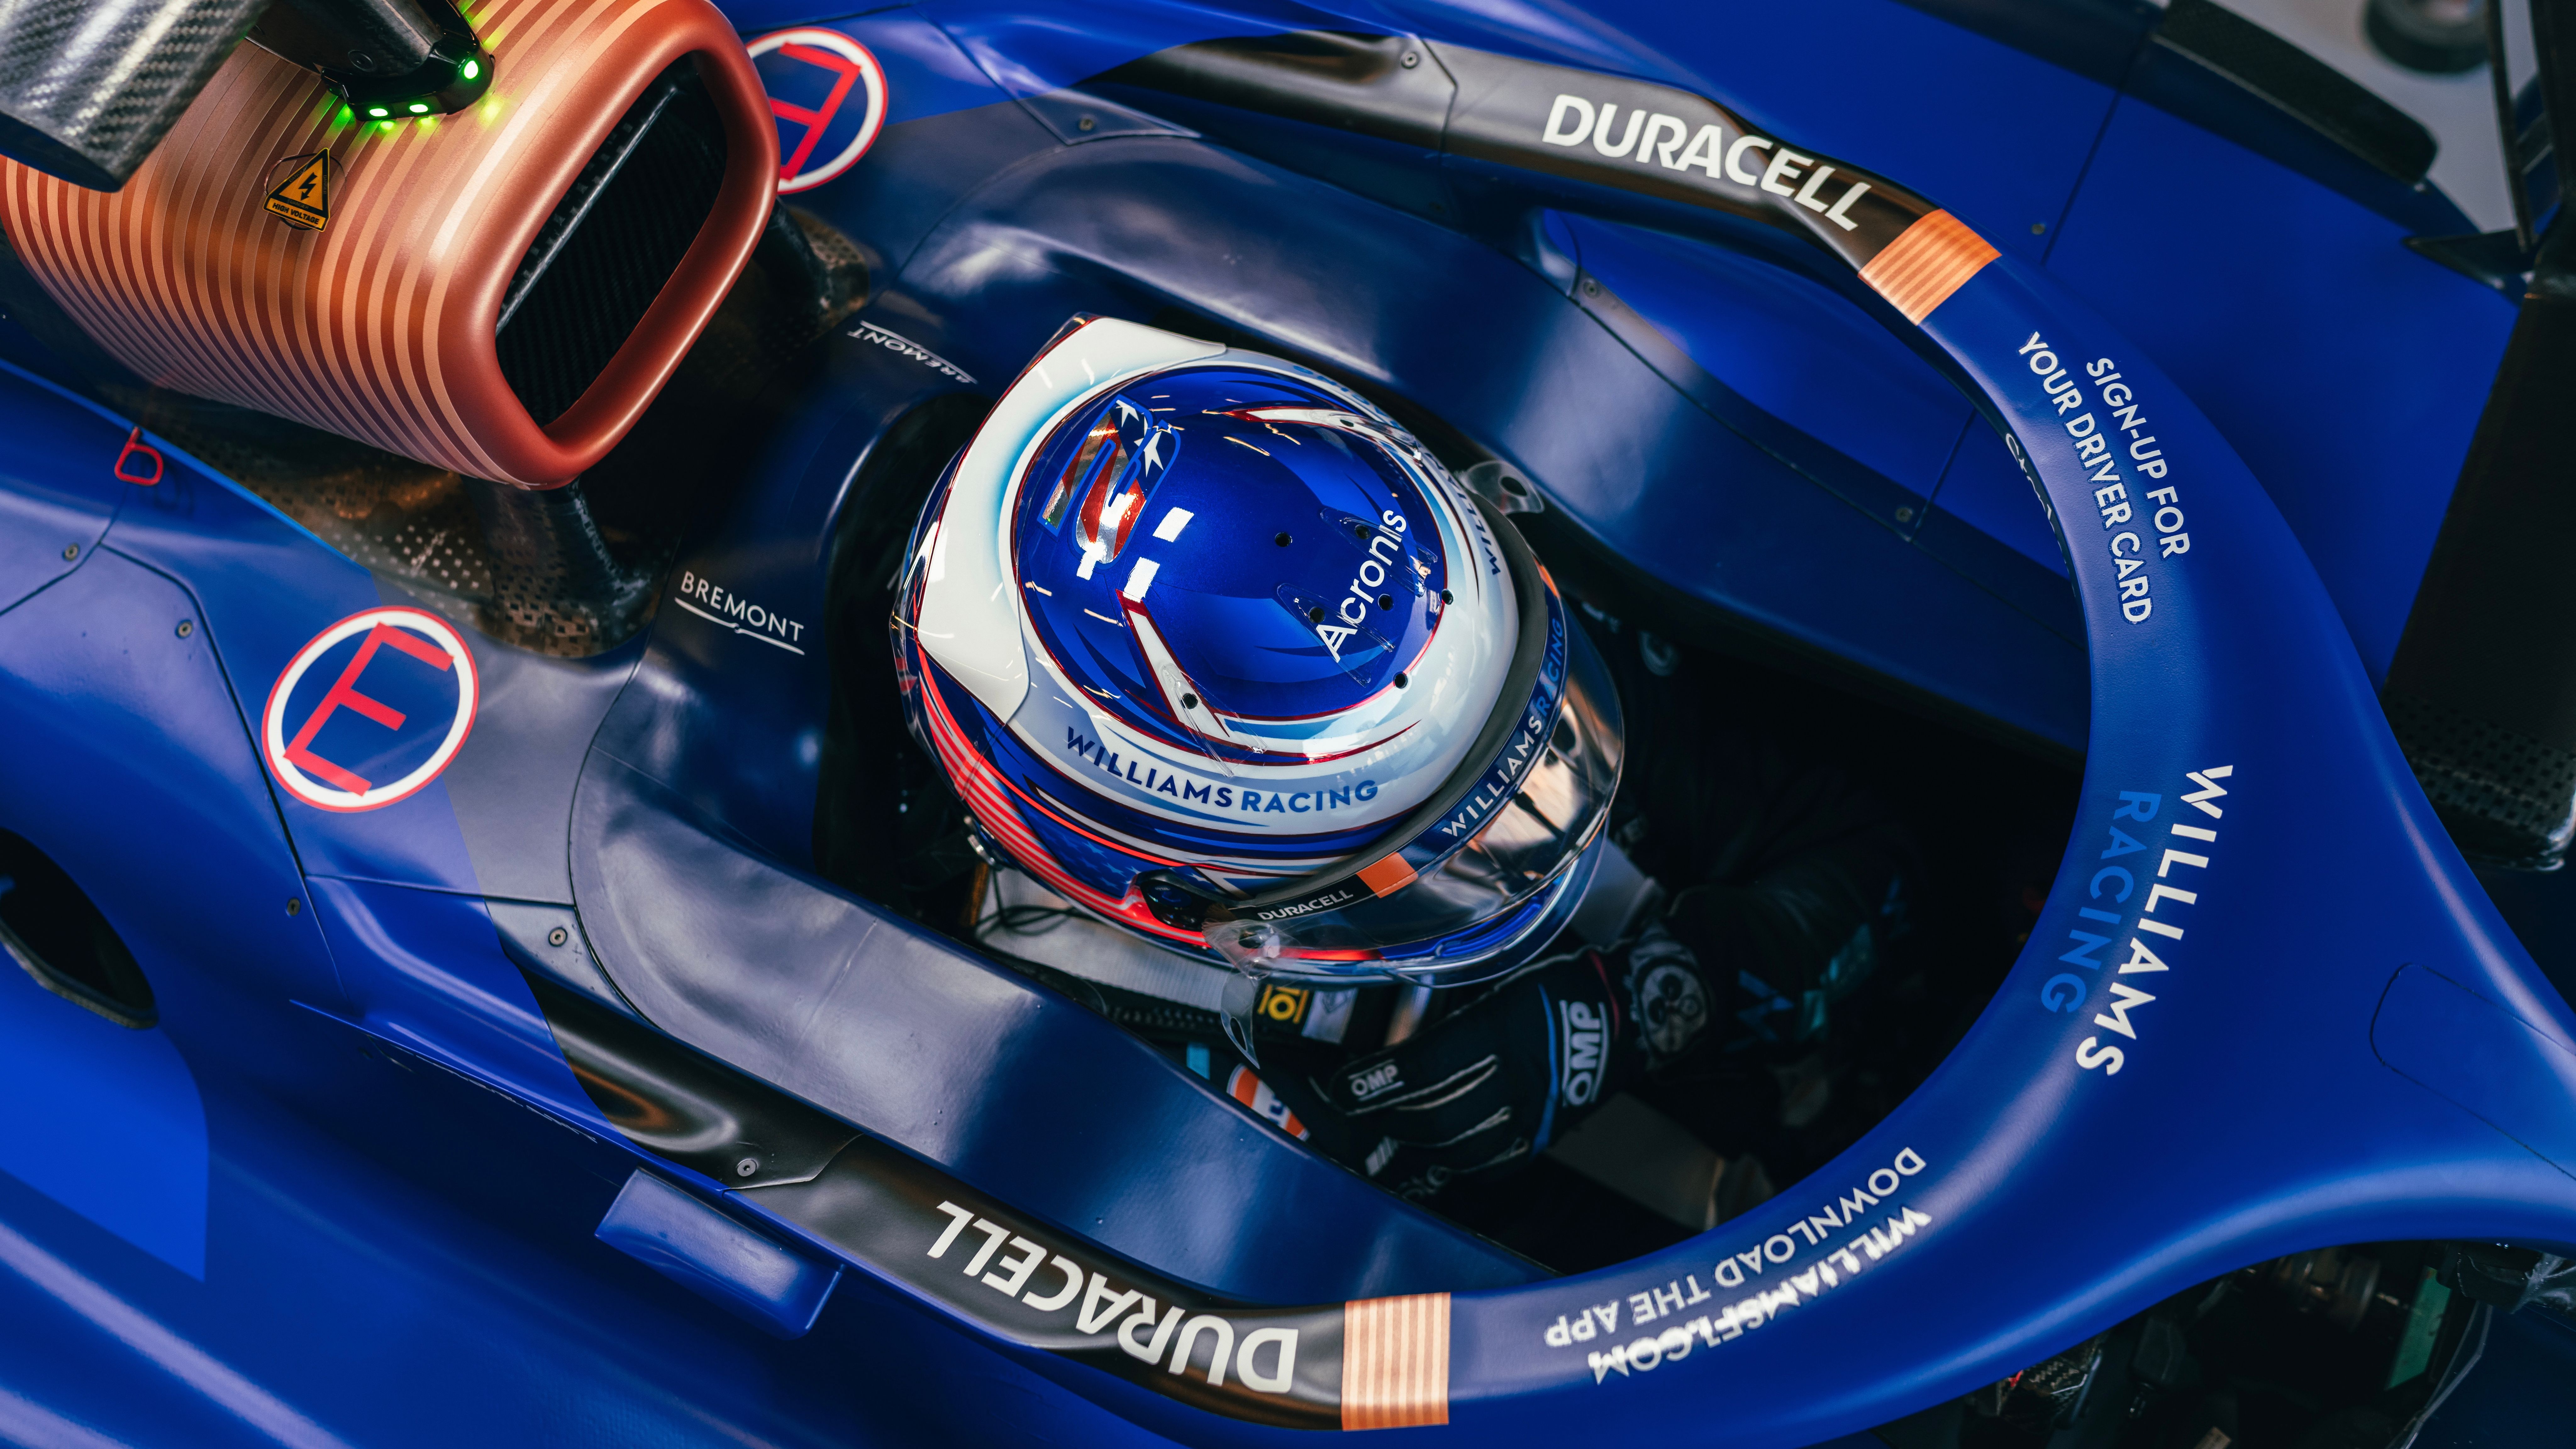 WATCH Onboard the FW45 Williams Racing